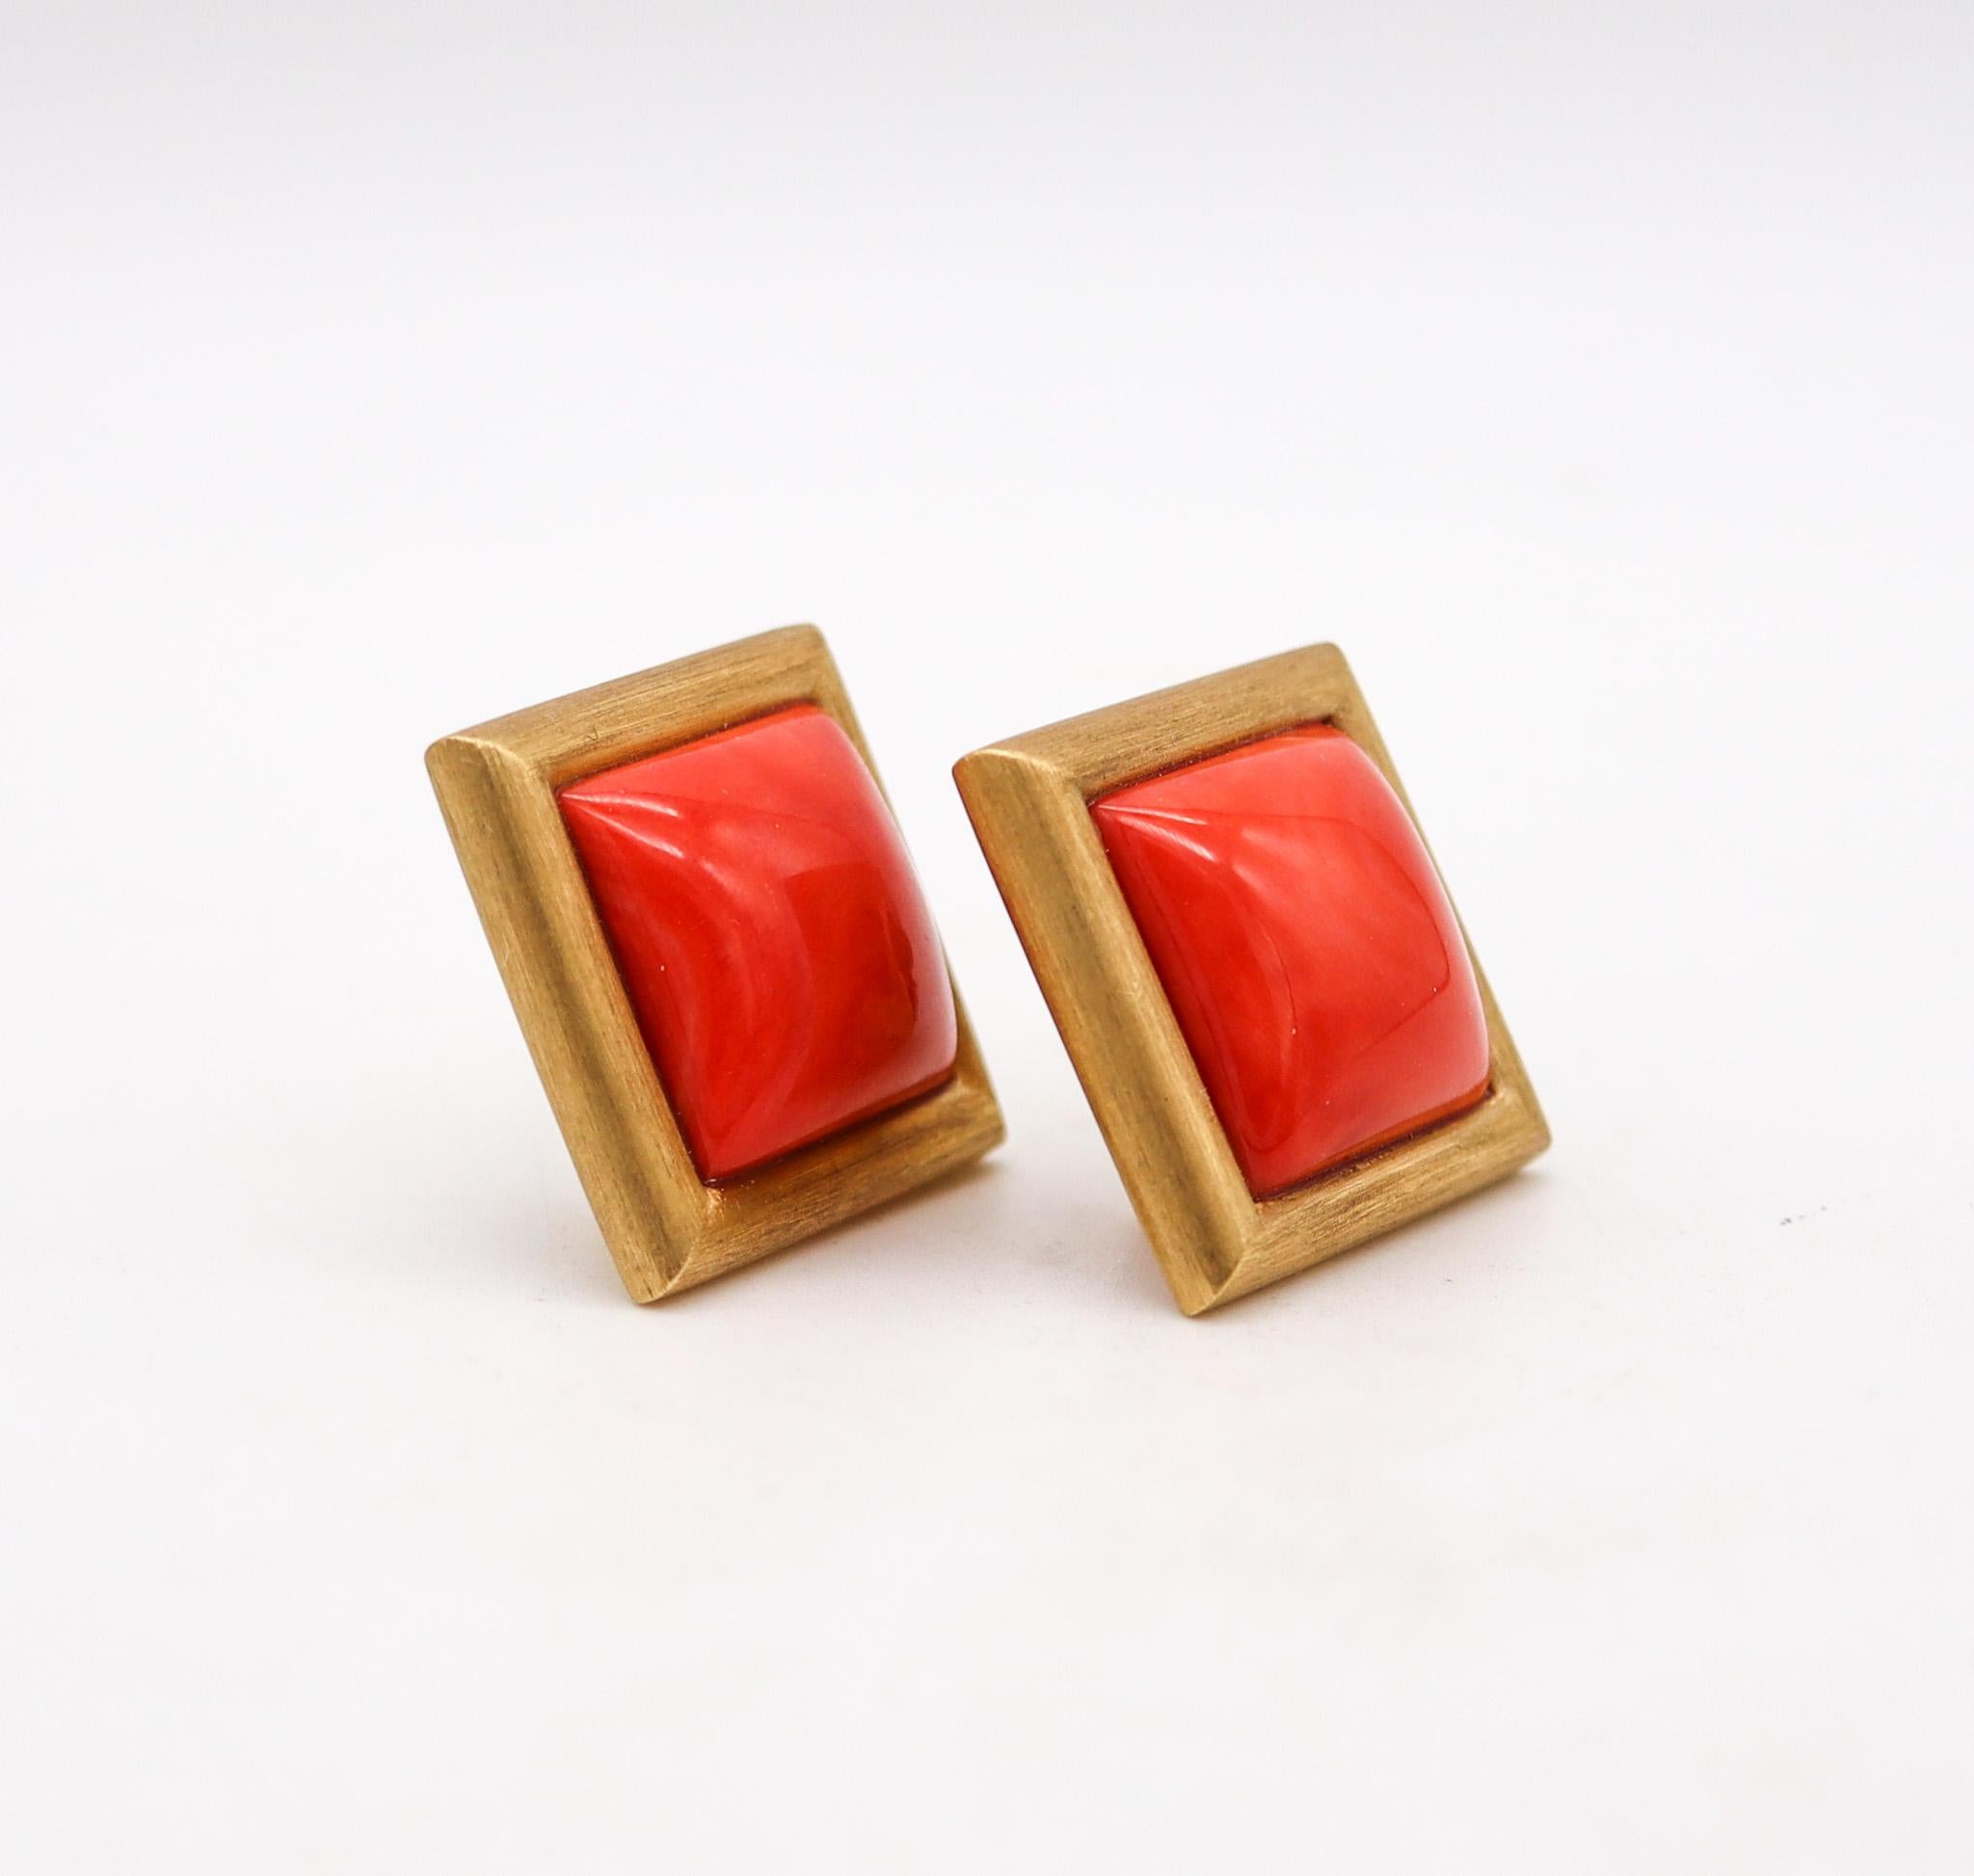 Magnificent clip-on earrings with Italian coral.

Fabulous pair of contemporary clips-on earrings, created in Europe in the late 20th century. They was crafted with squared shape in solid yellow gold of 18 karats with textured brushed finish and